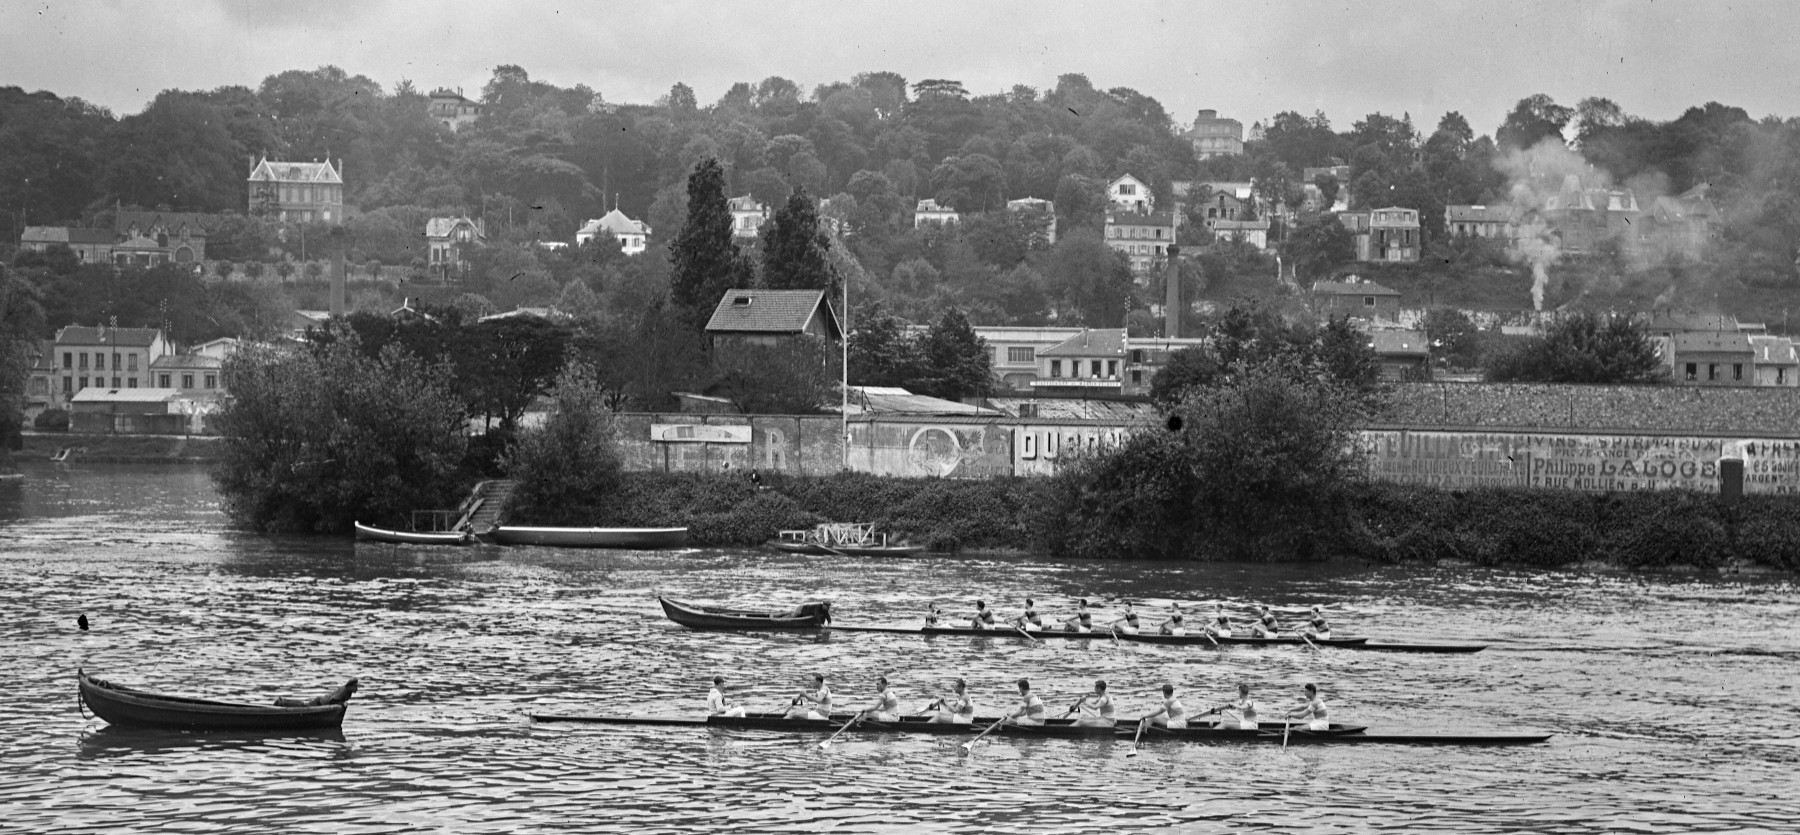 Match Rowing-Marne 23_5_25_départ Agence Rol - Gallica